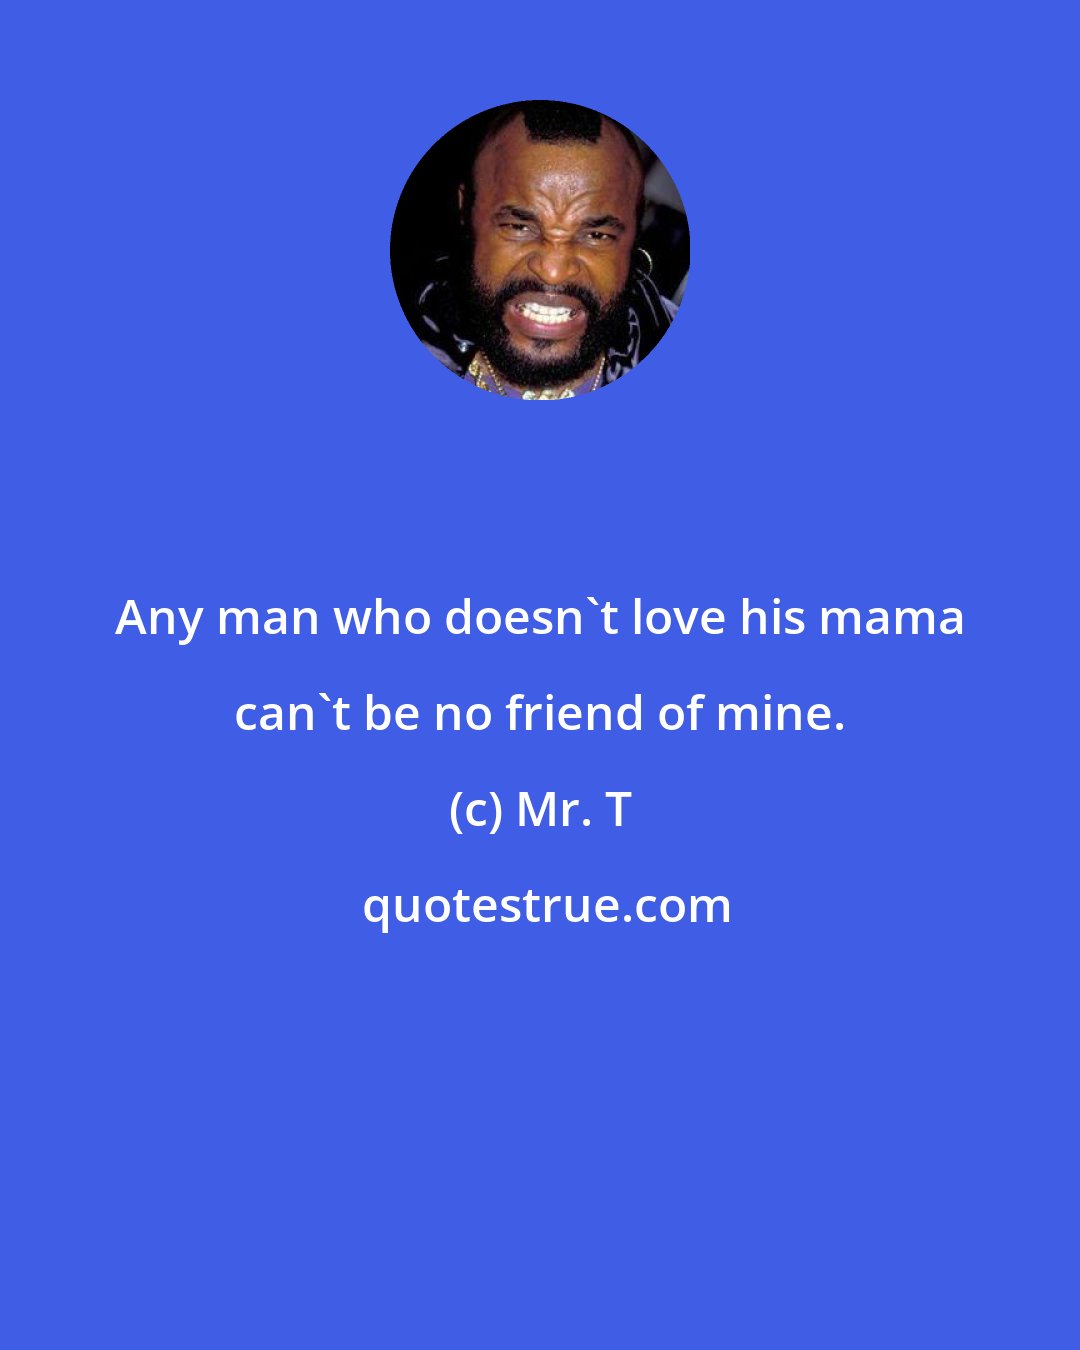 Mr. T: Any man who doesn't love his mama can't be no friend of mine.